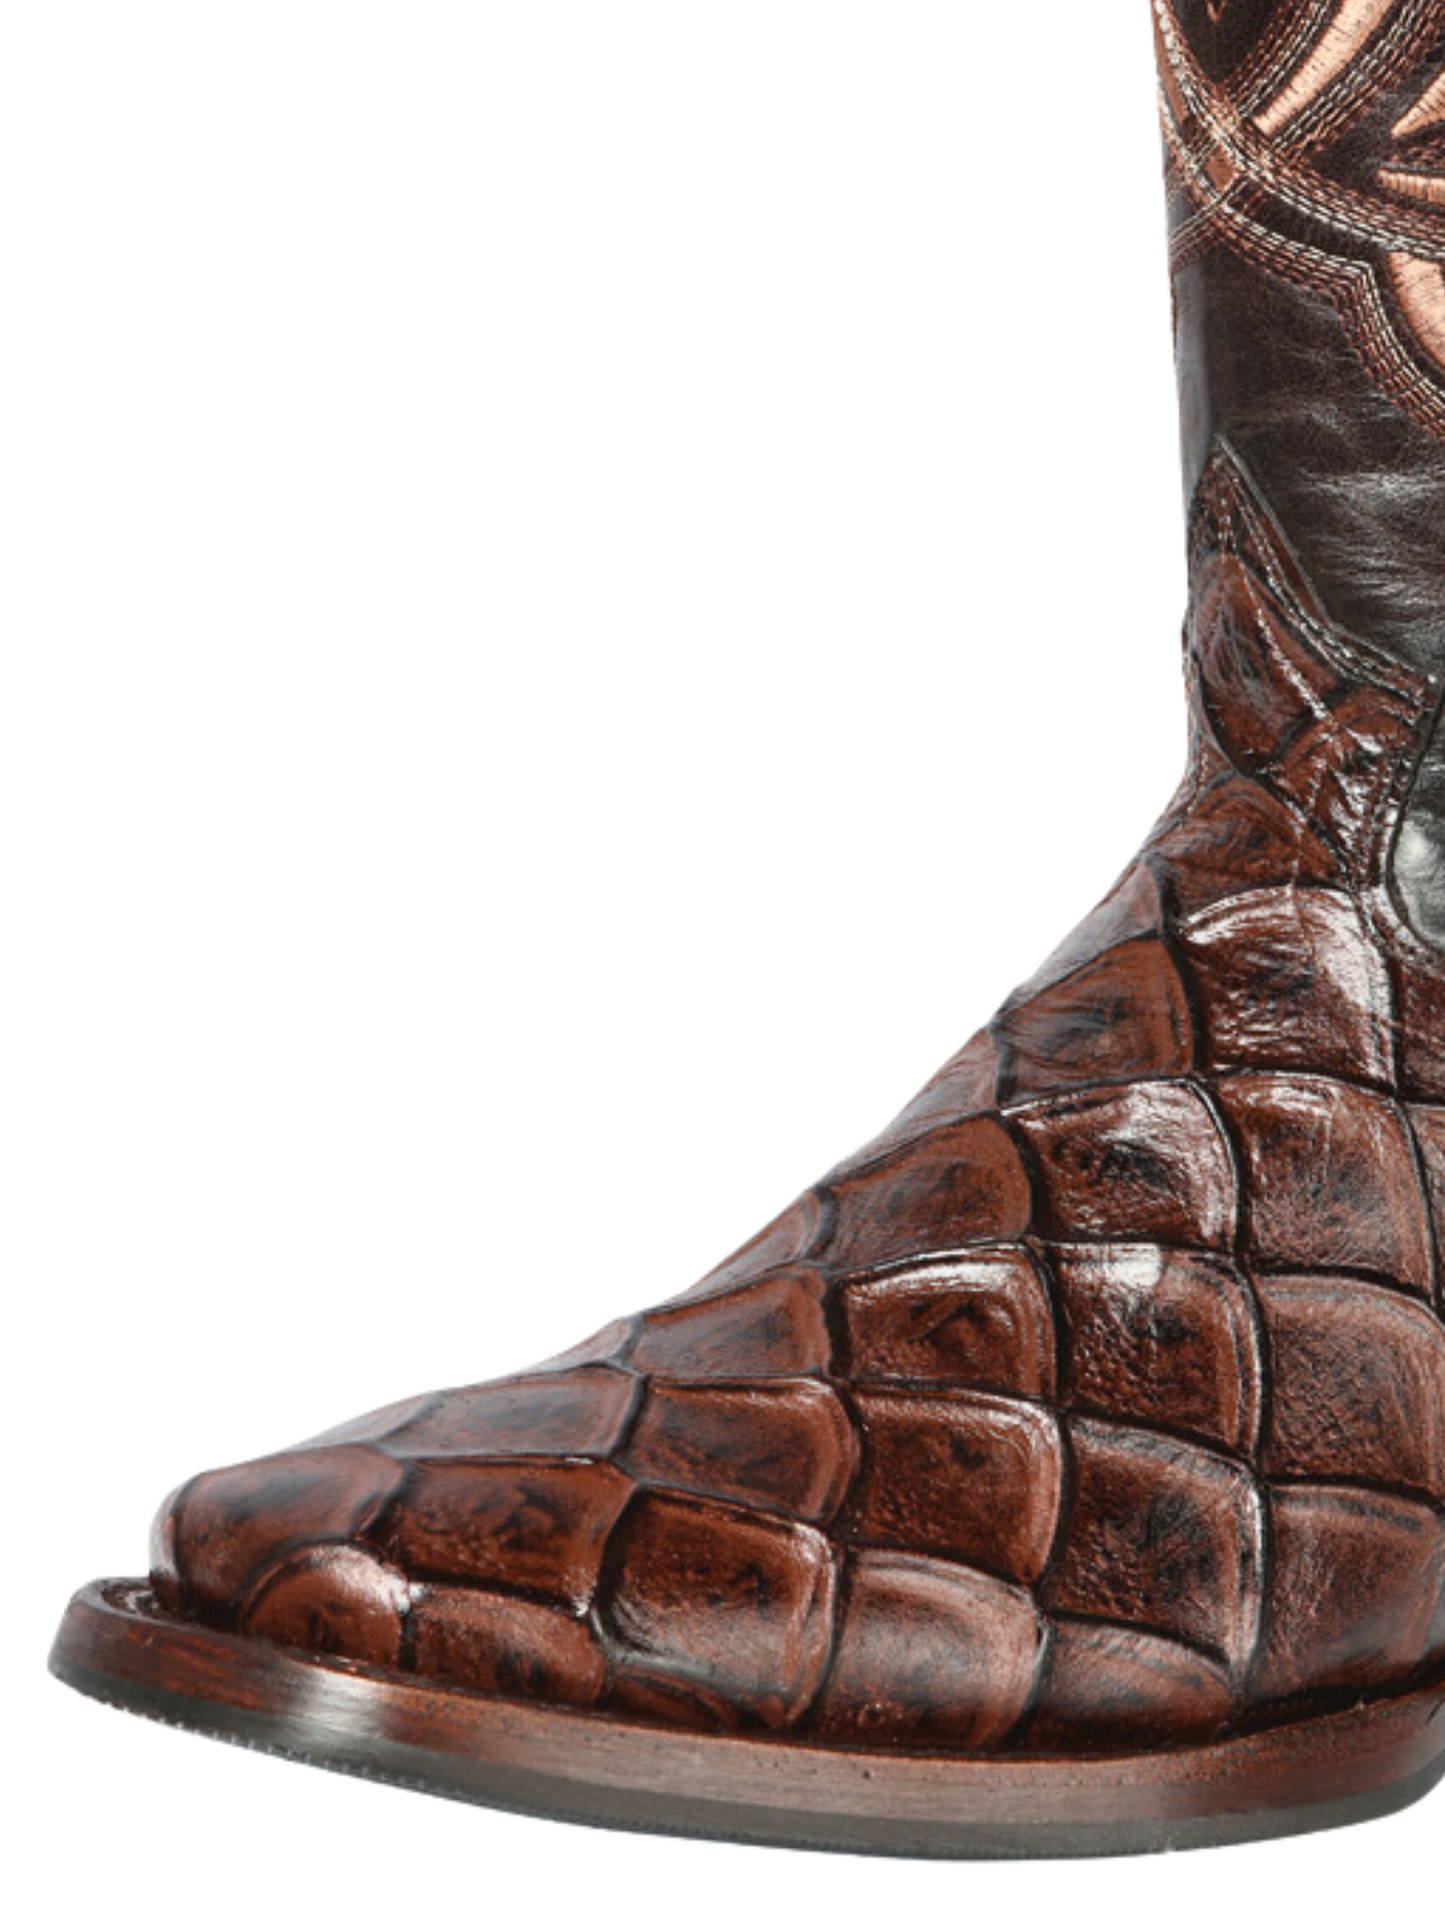 Rodeo Cowboy Boots Imitation of Monster Fish Engraved in Cowhide Leather for Men 'El General' - ID: 44664 Cowboy Boots El General